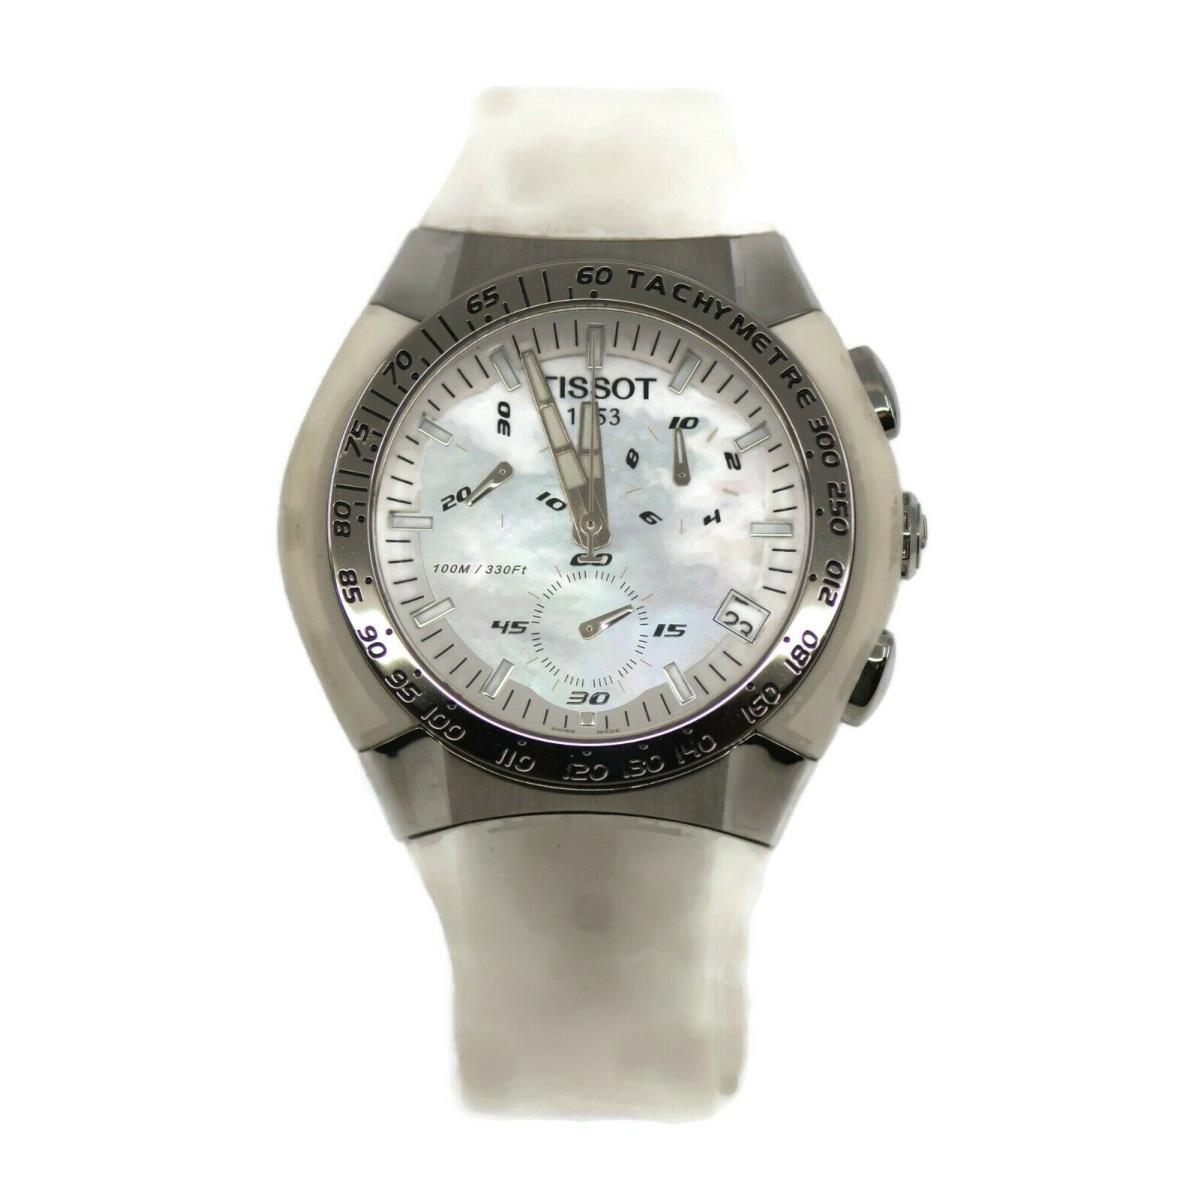 Tissot T-sport Chronograph Stainless Steel Watch T0104171711100